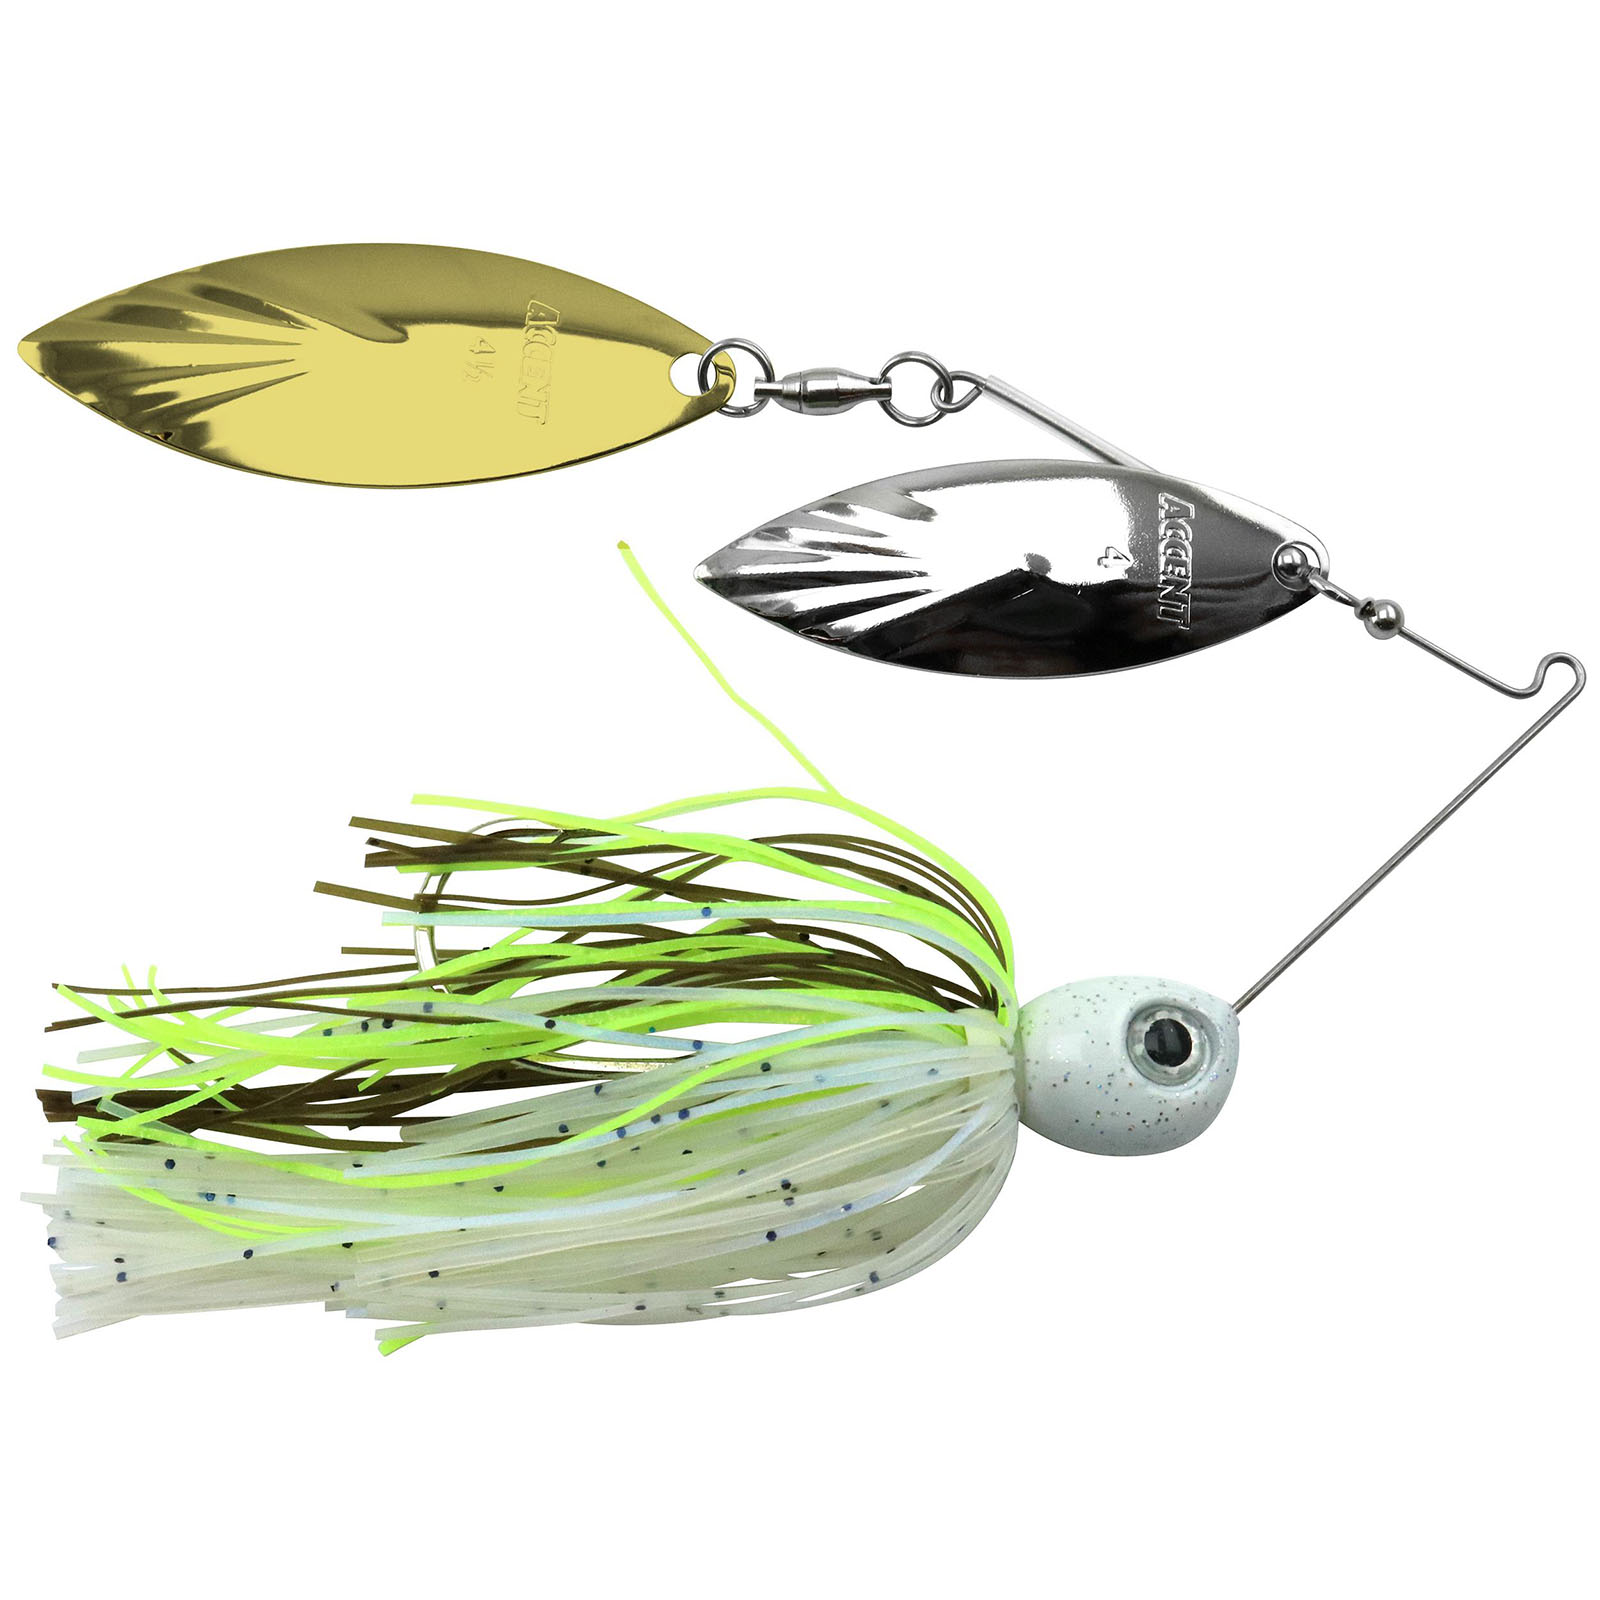 Unbranded Spinnerbait Fishing Baits & Lures for sale, Shop with Afterpay